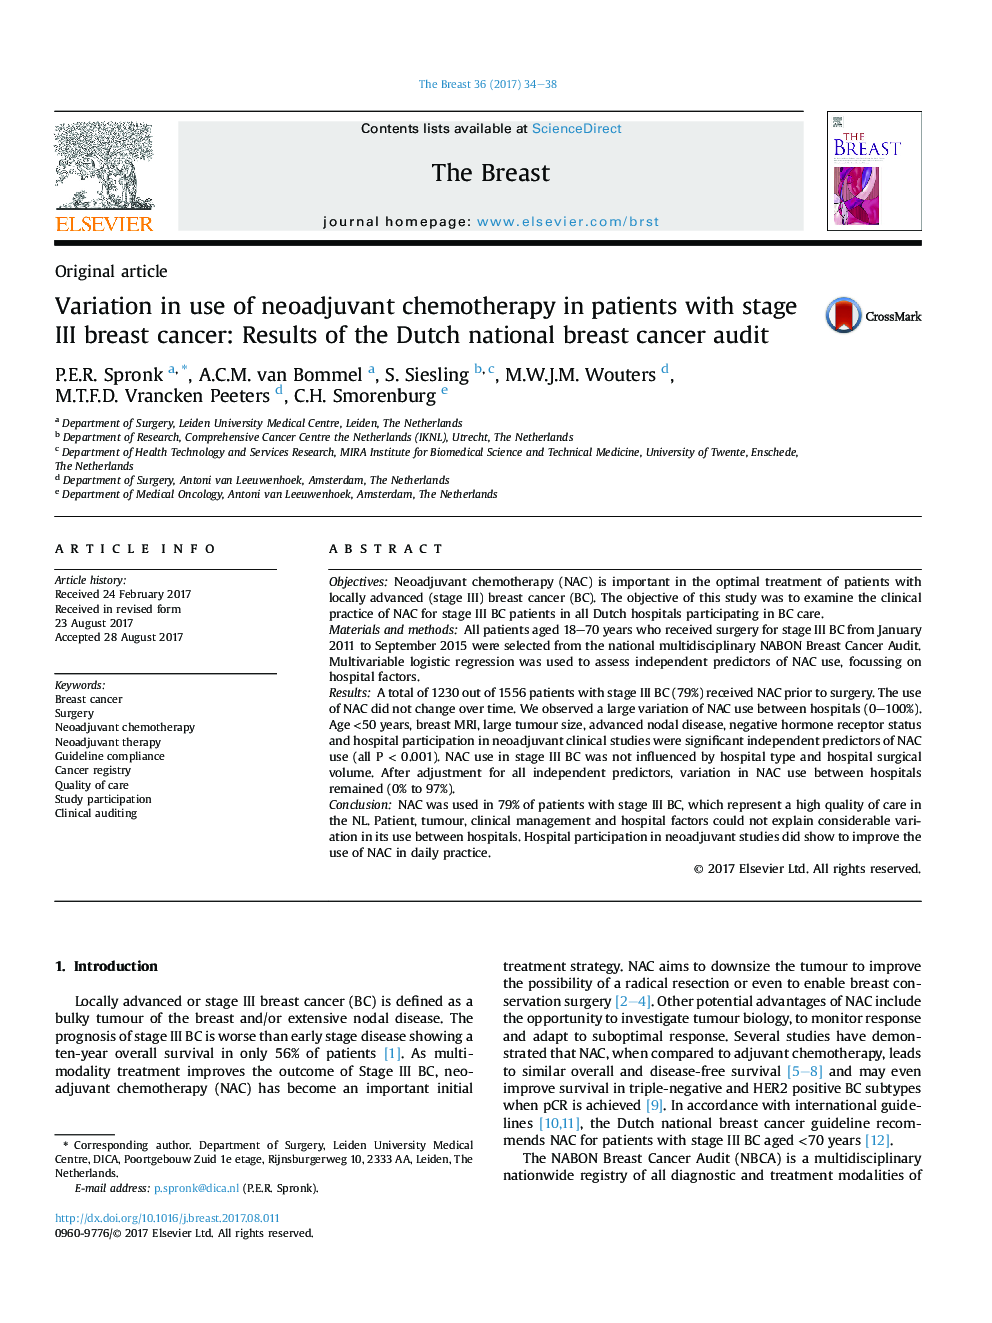 Variation in use of neoadjuvant chemotherapy in patients with stage III breast cancer: Results of the Dutch national breast cancer audit